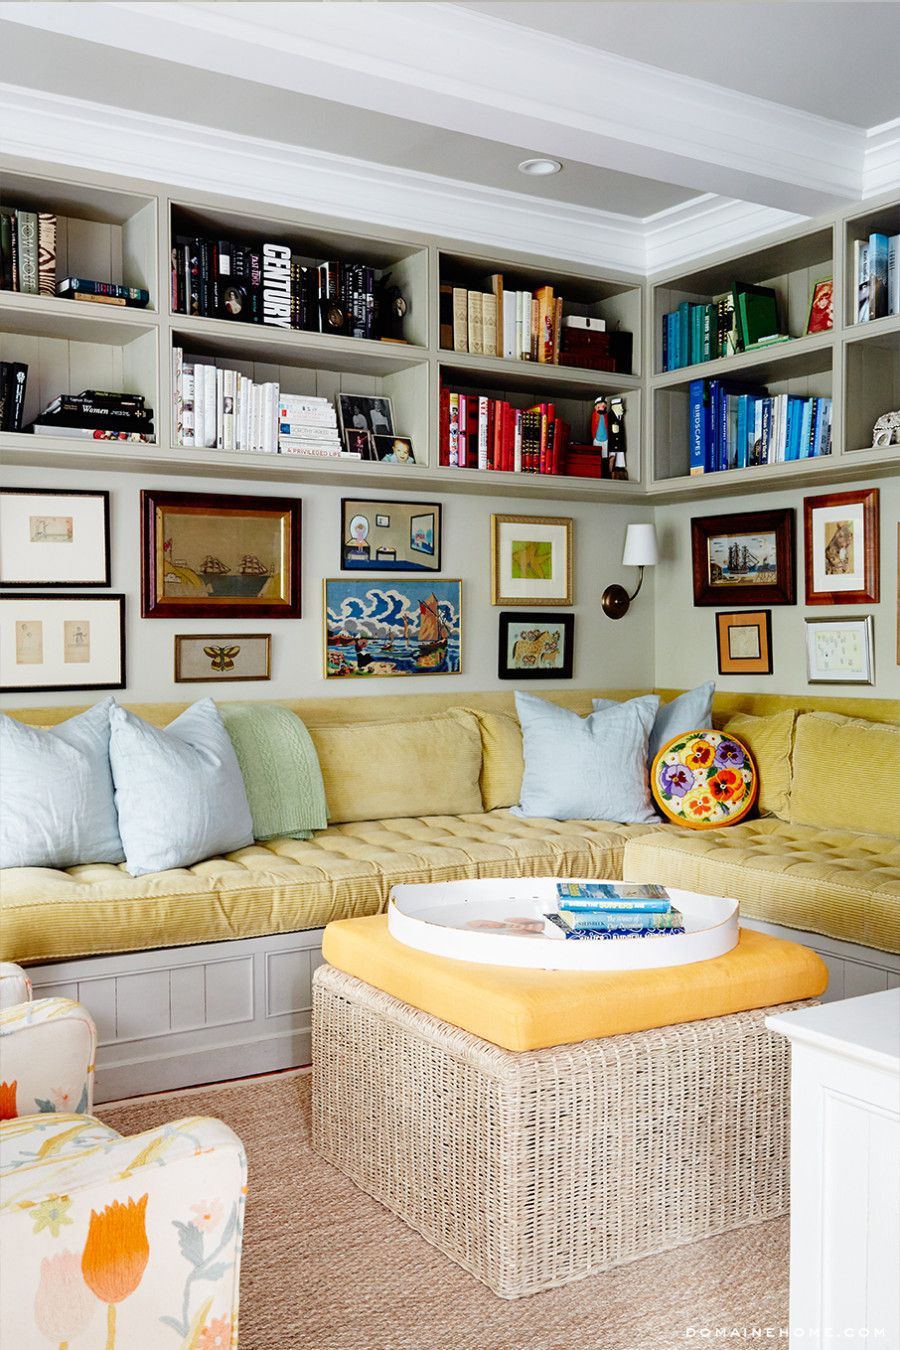 Coastal family room – sag habor – built-in seating area. Bookshelves up to the ceiling with books arranged by color, gallery wall